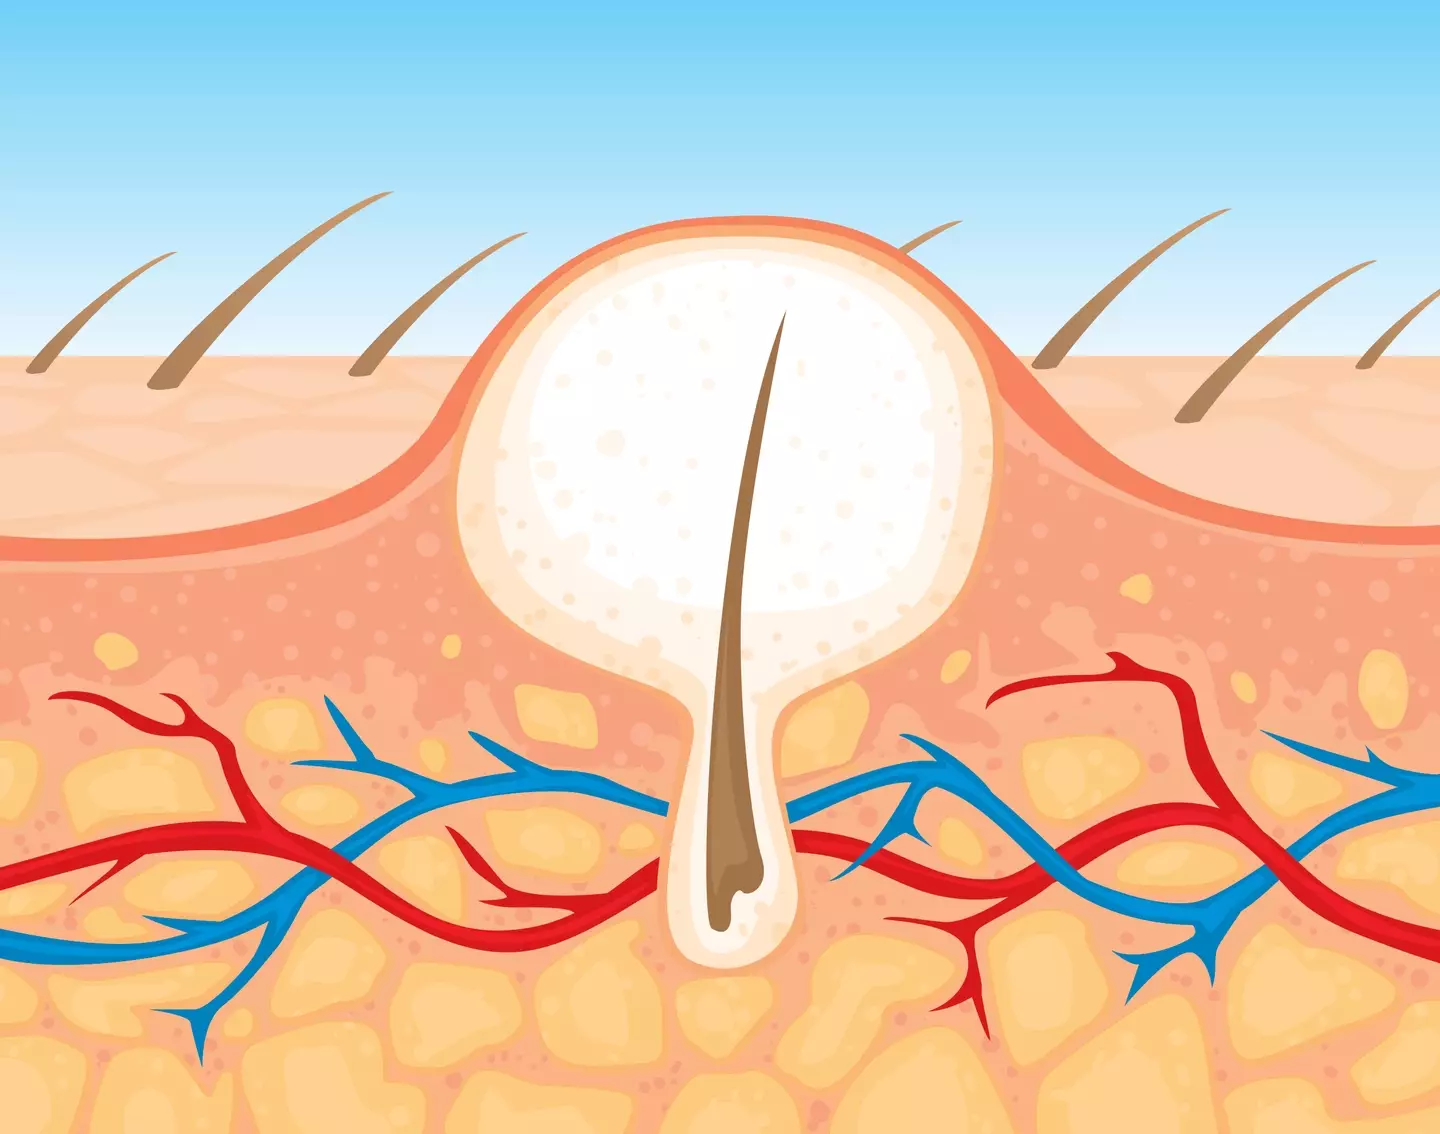 Ingrown hairs occur when the hair becomes trapped underneath the skin but proceeds to grow.